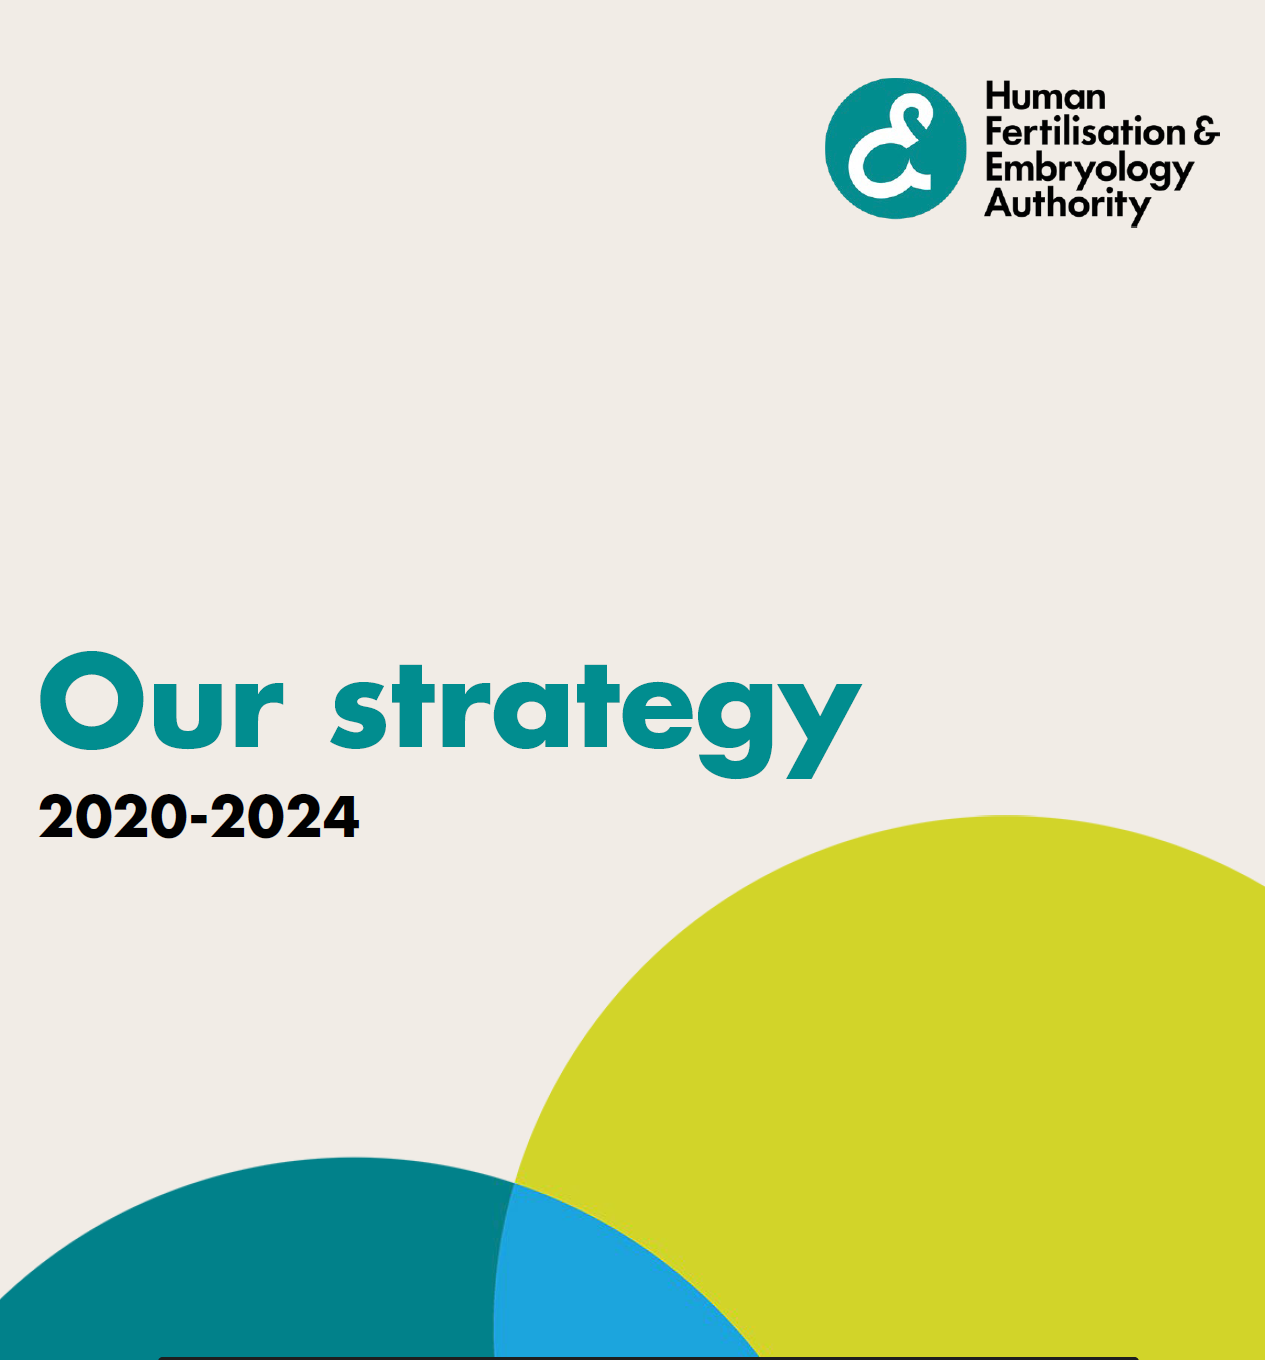 Human Fertilisation and Embryology Authority strategy cover 2020-2024